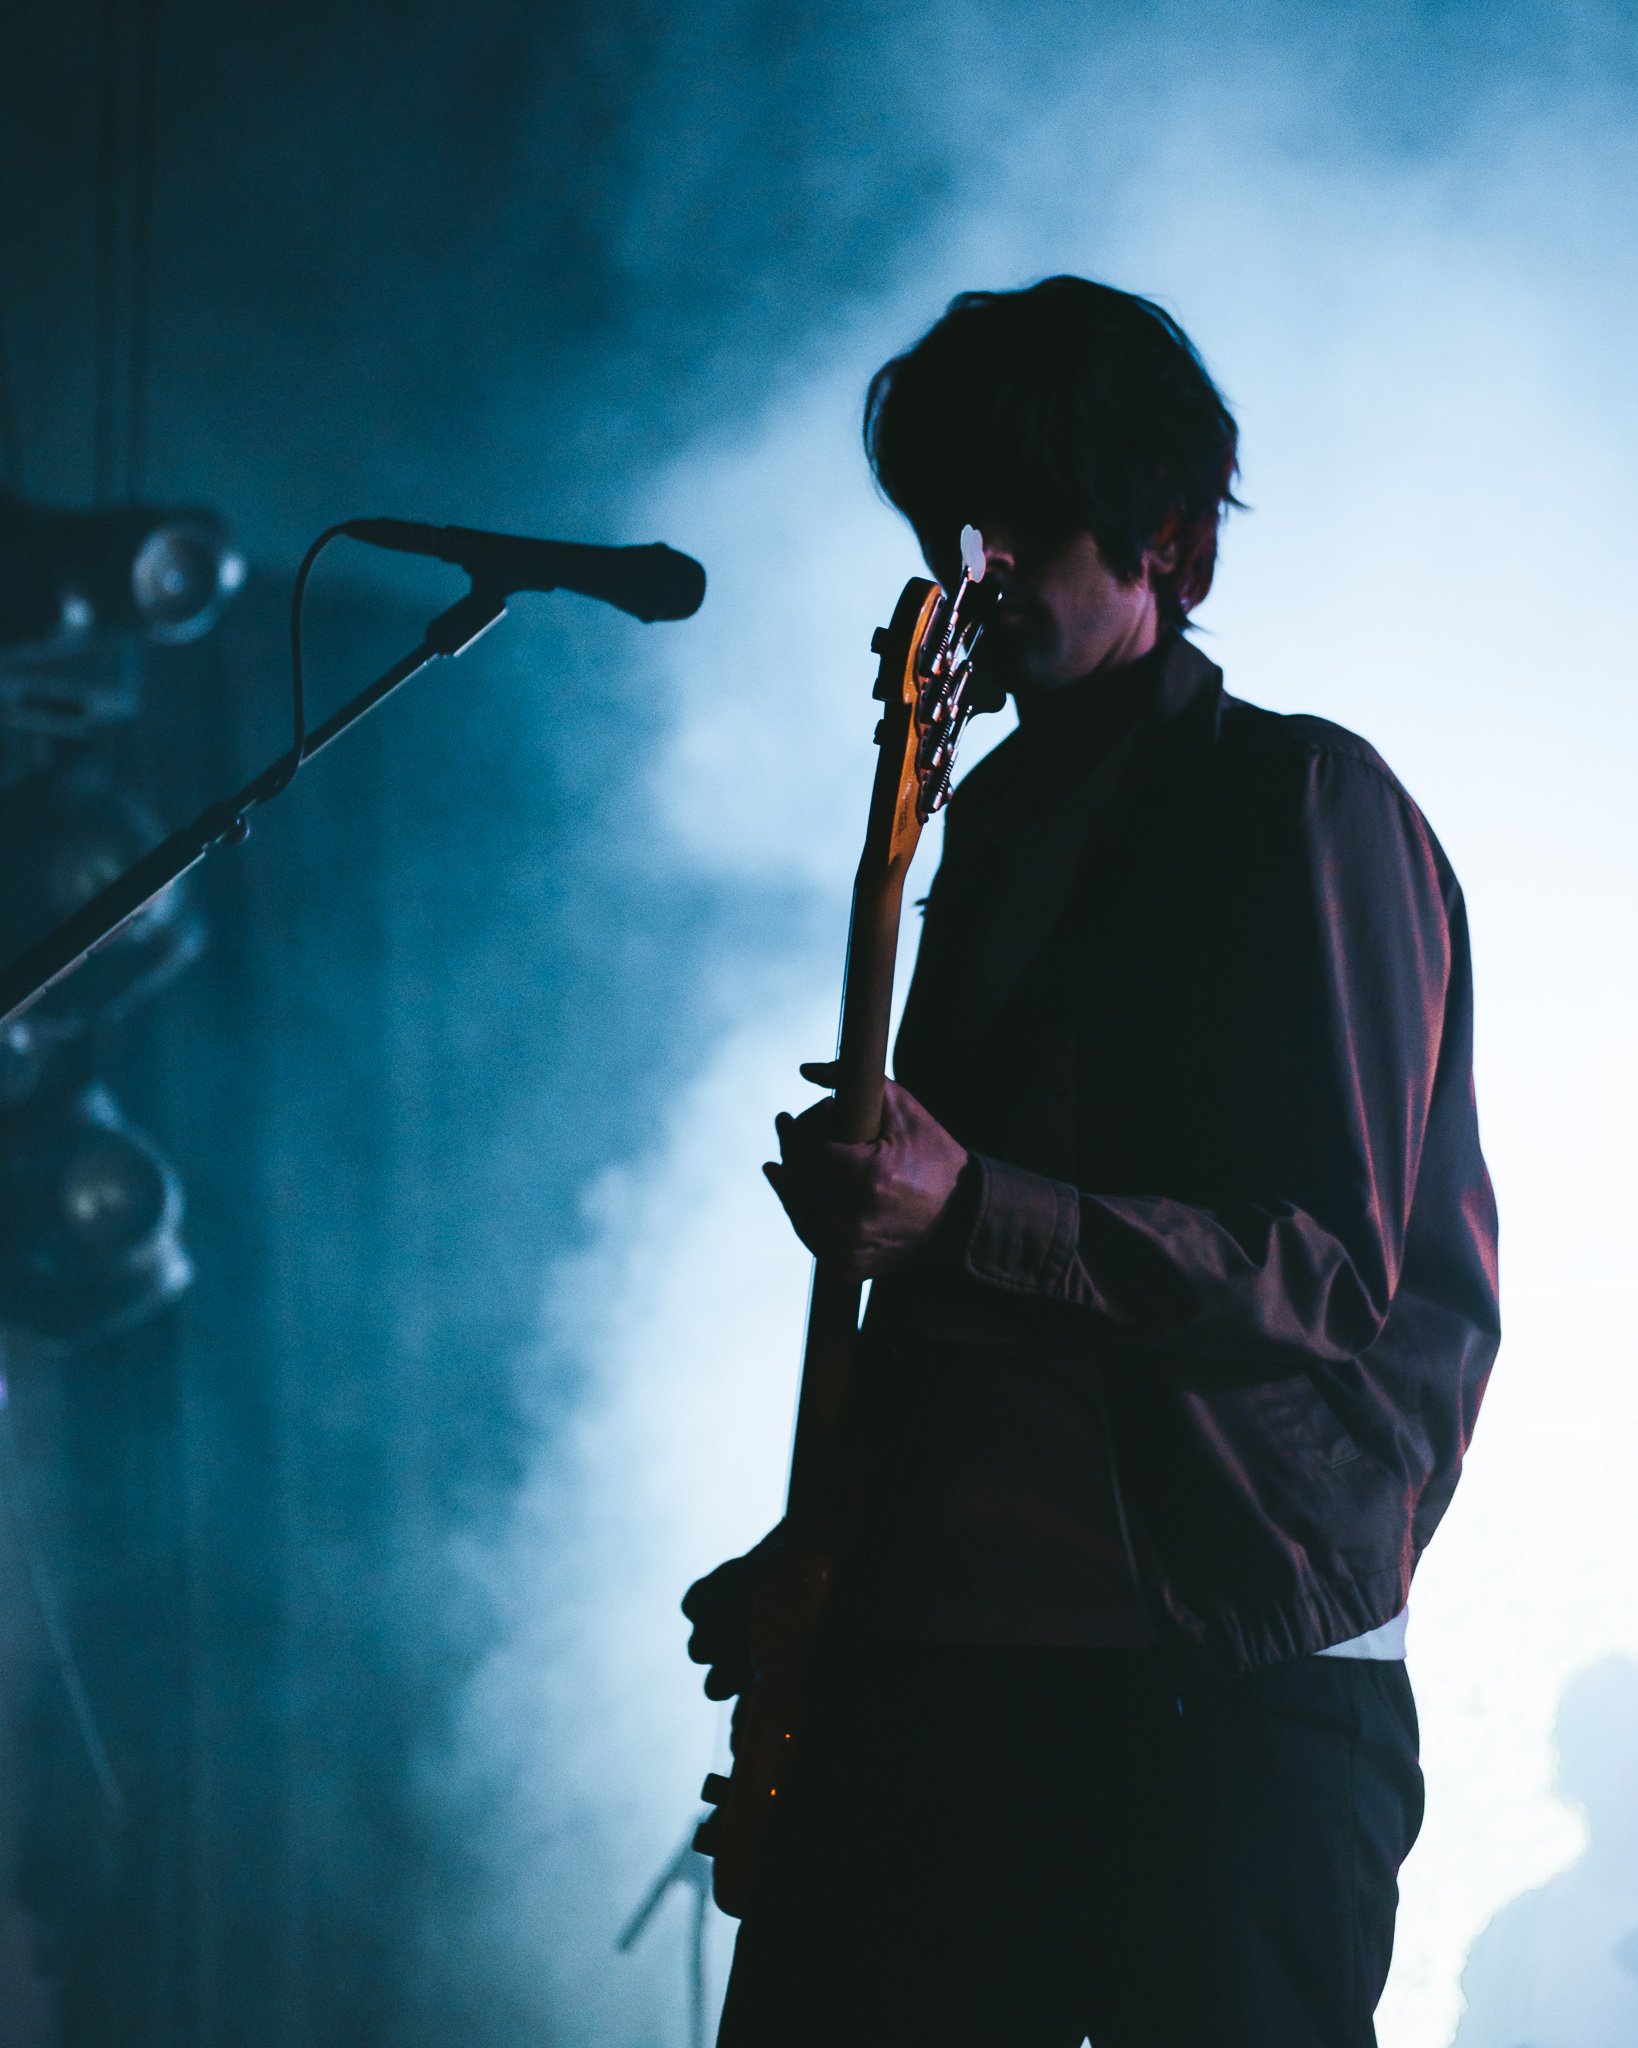  Frontman Dallon Weekes steps out onto the foggy stage. 